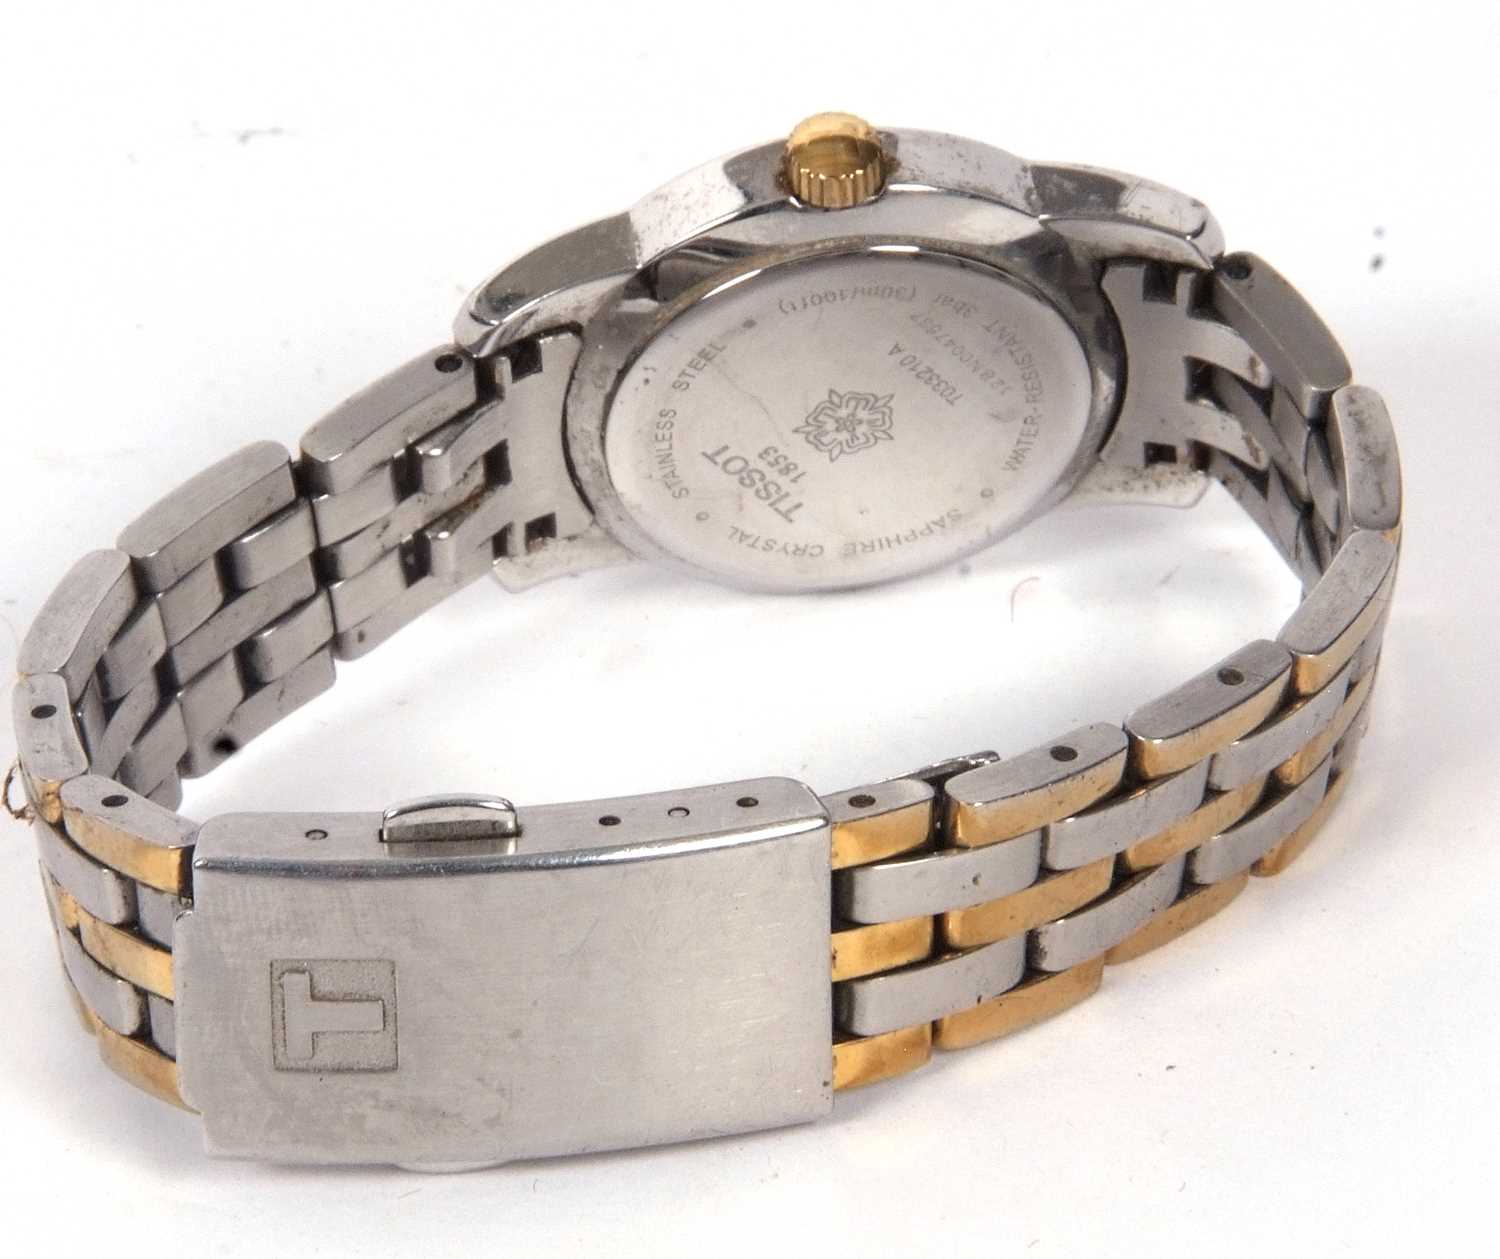 Ladies Tissot Quartz wristwatch, it has a two tone bracelet along with a mother of pearl dial, - Image 3 of 4